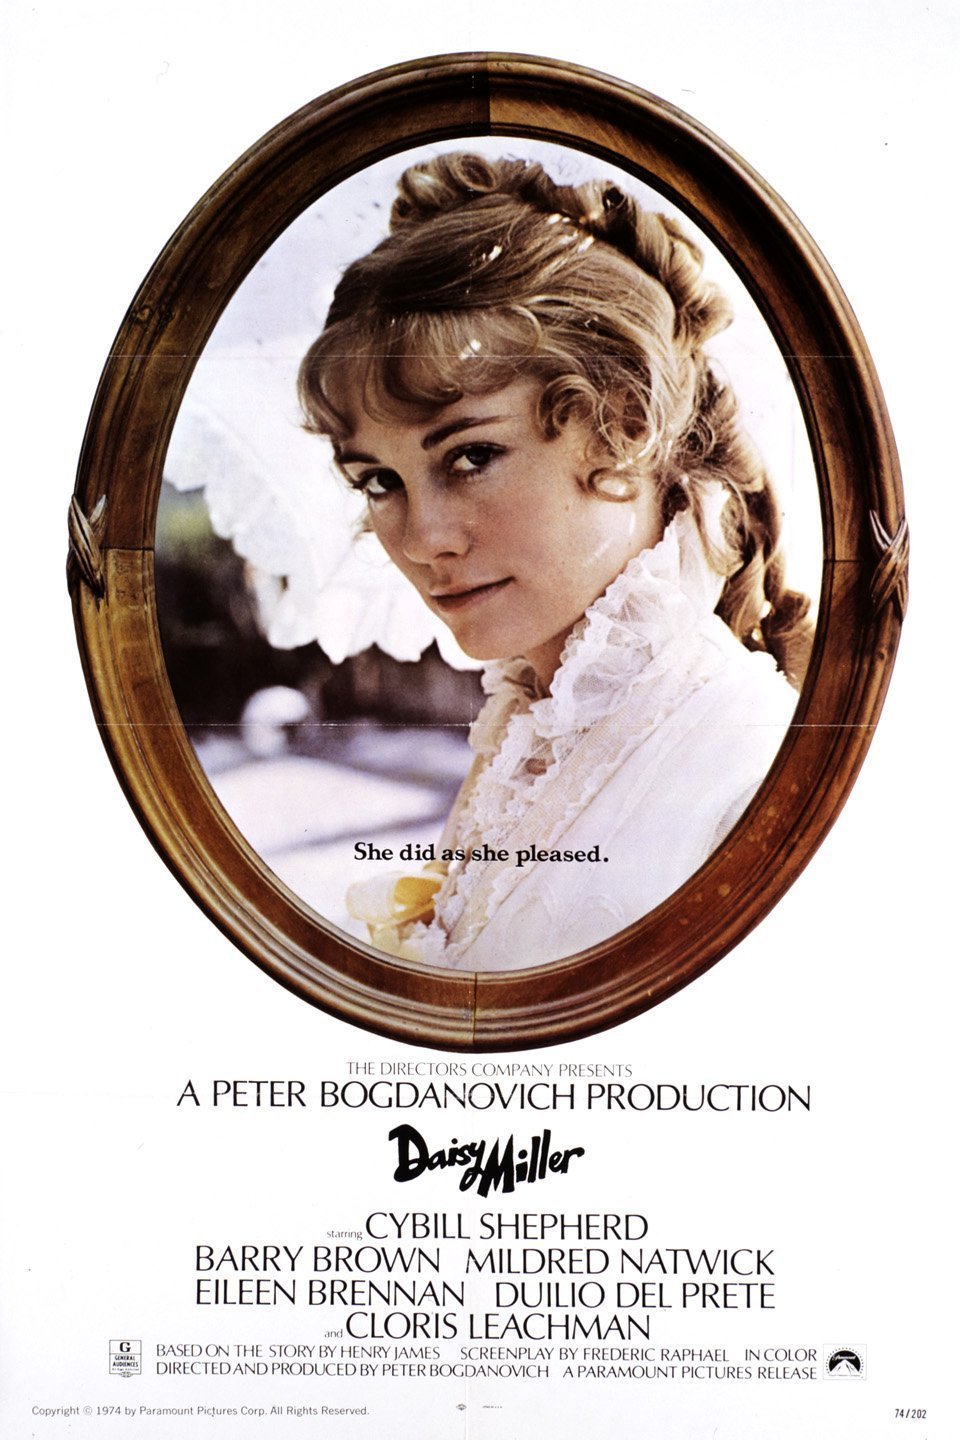 Poster of the movie Daisy Miller